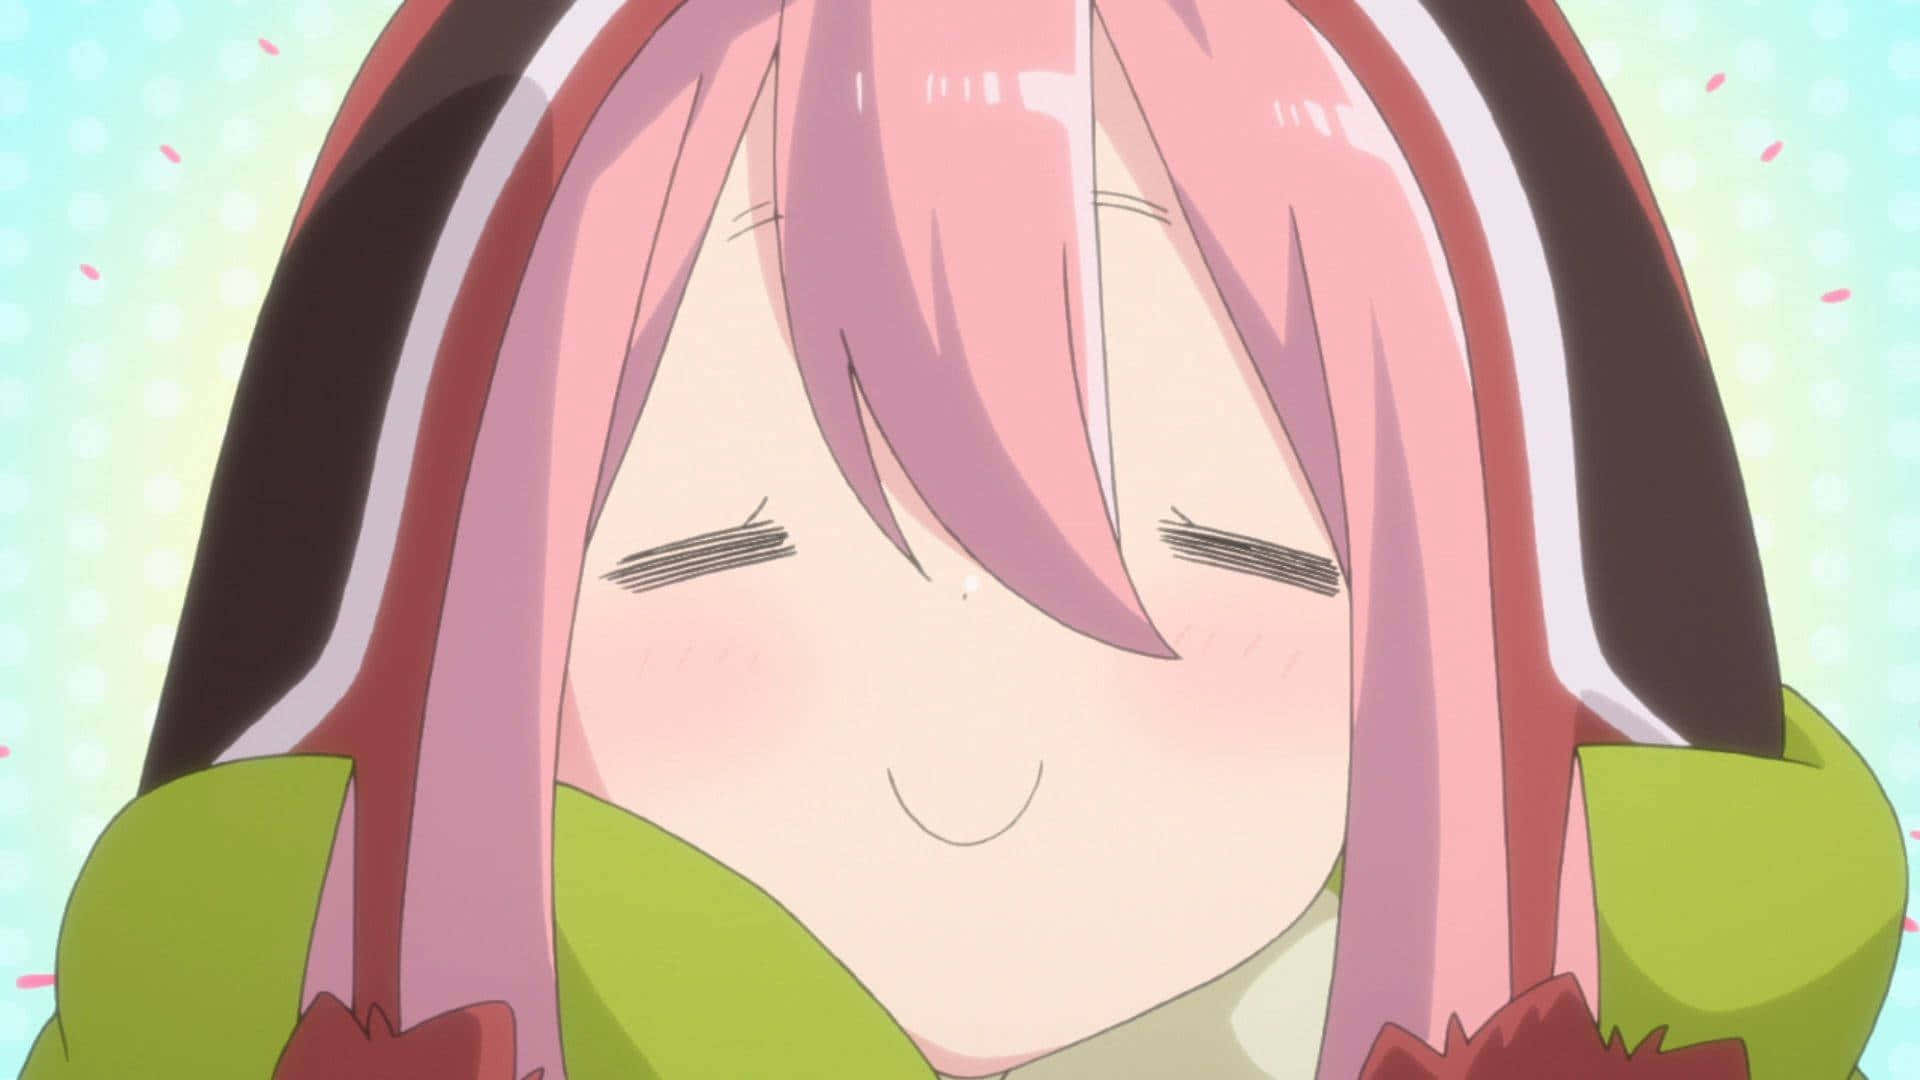 Smug Face Of An Anime Character With Pink Hair Wallpaper